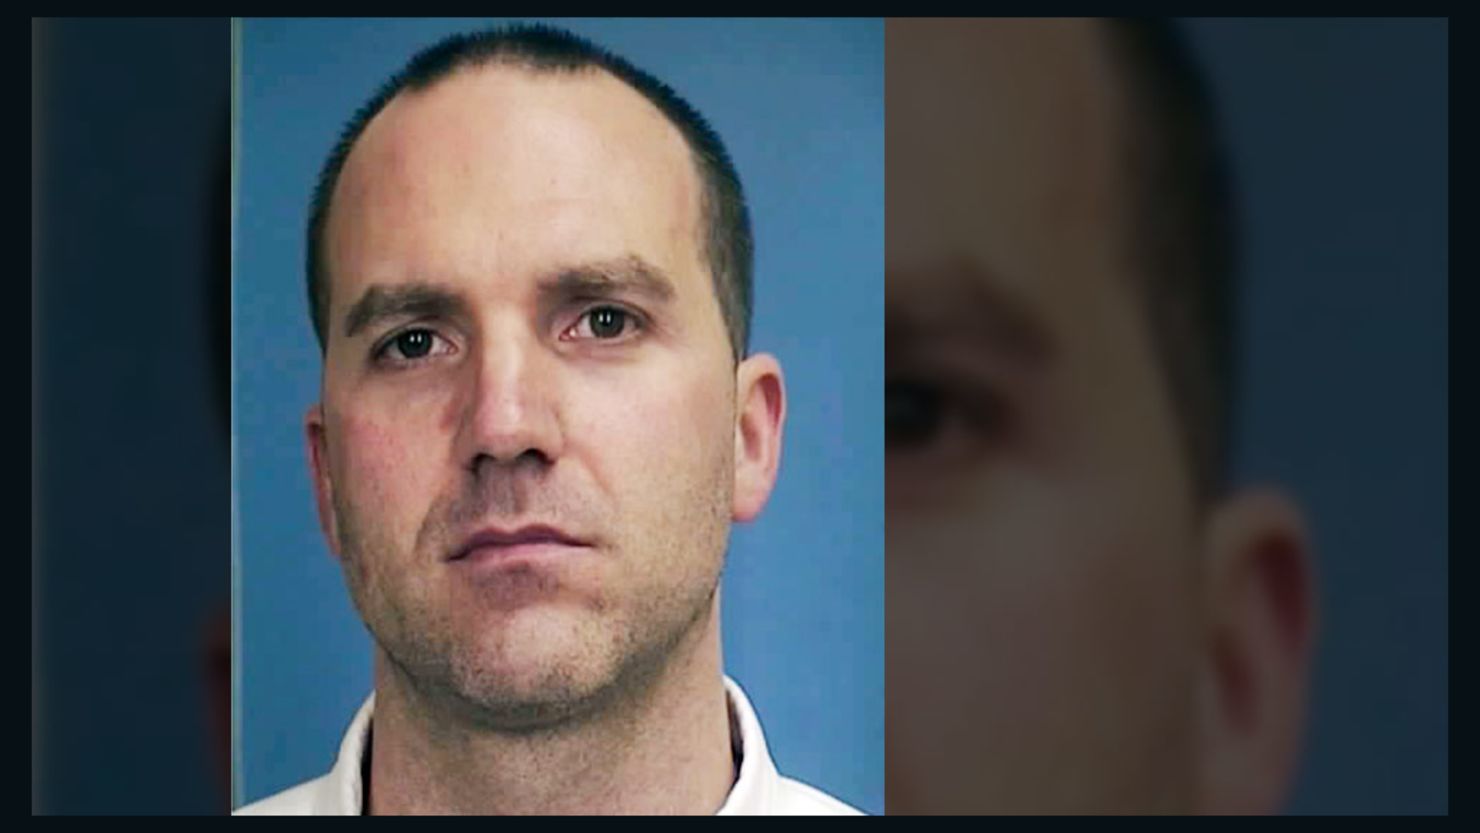 Mississippi's attorney general offered a reward for help tracking down convicted murderer Joseph Ozment.